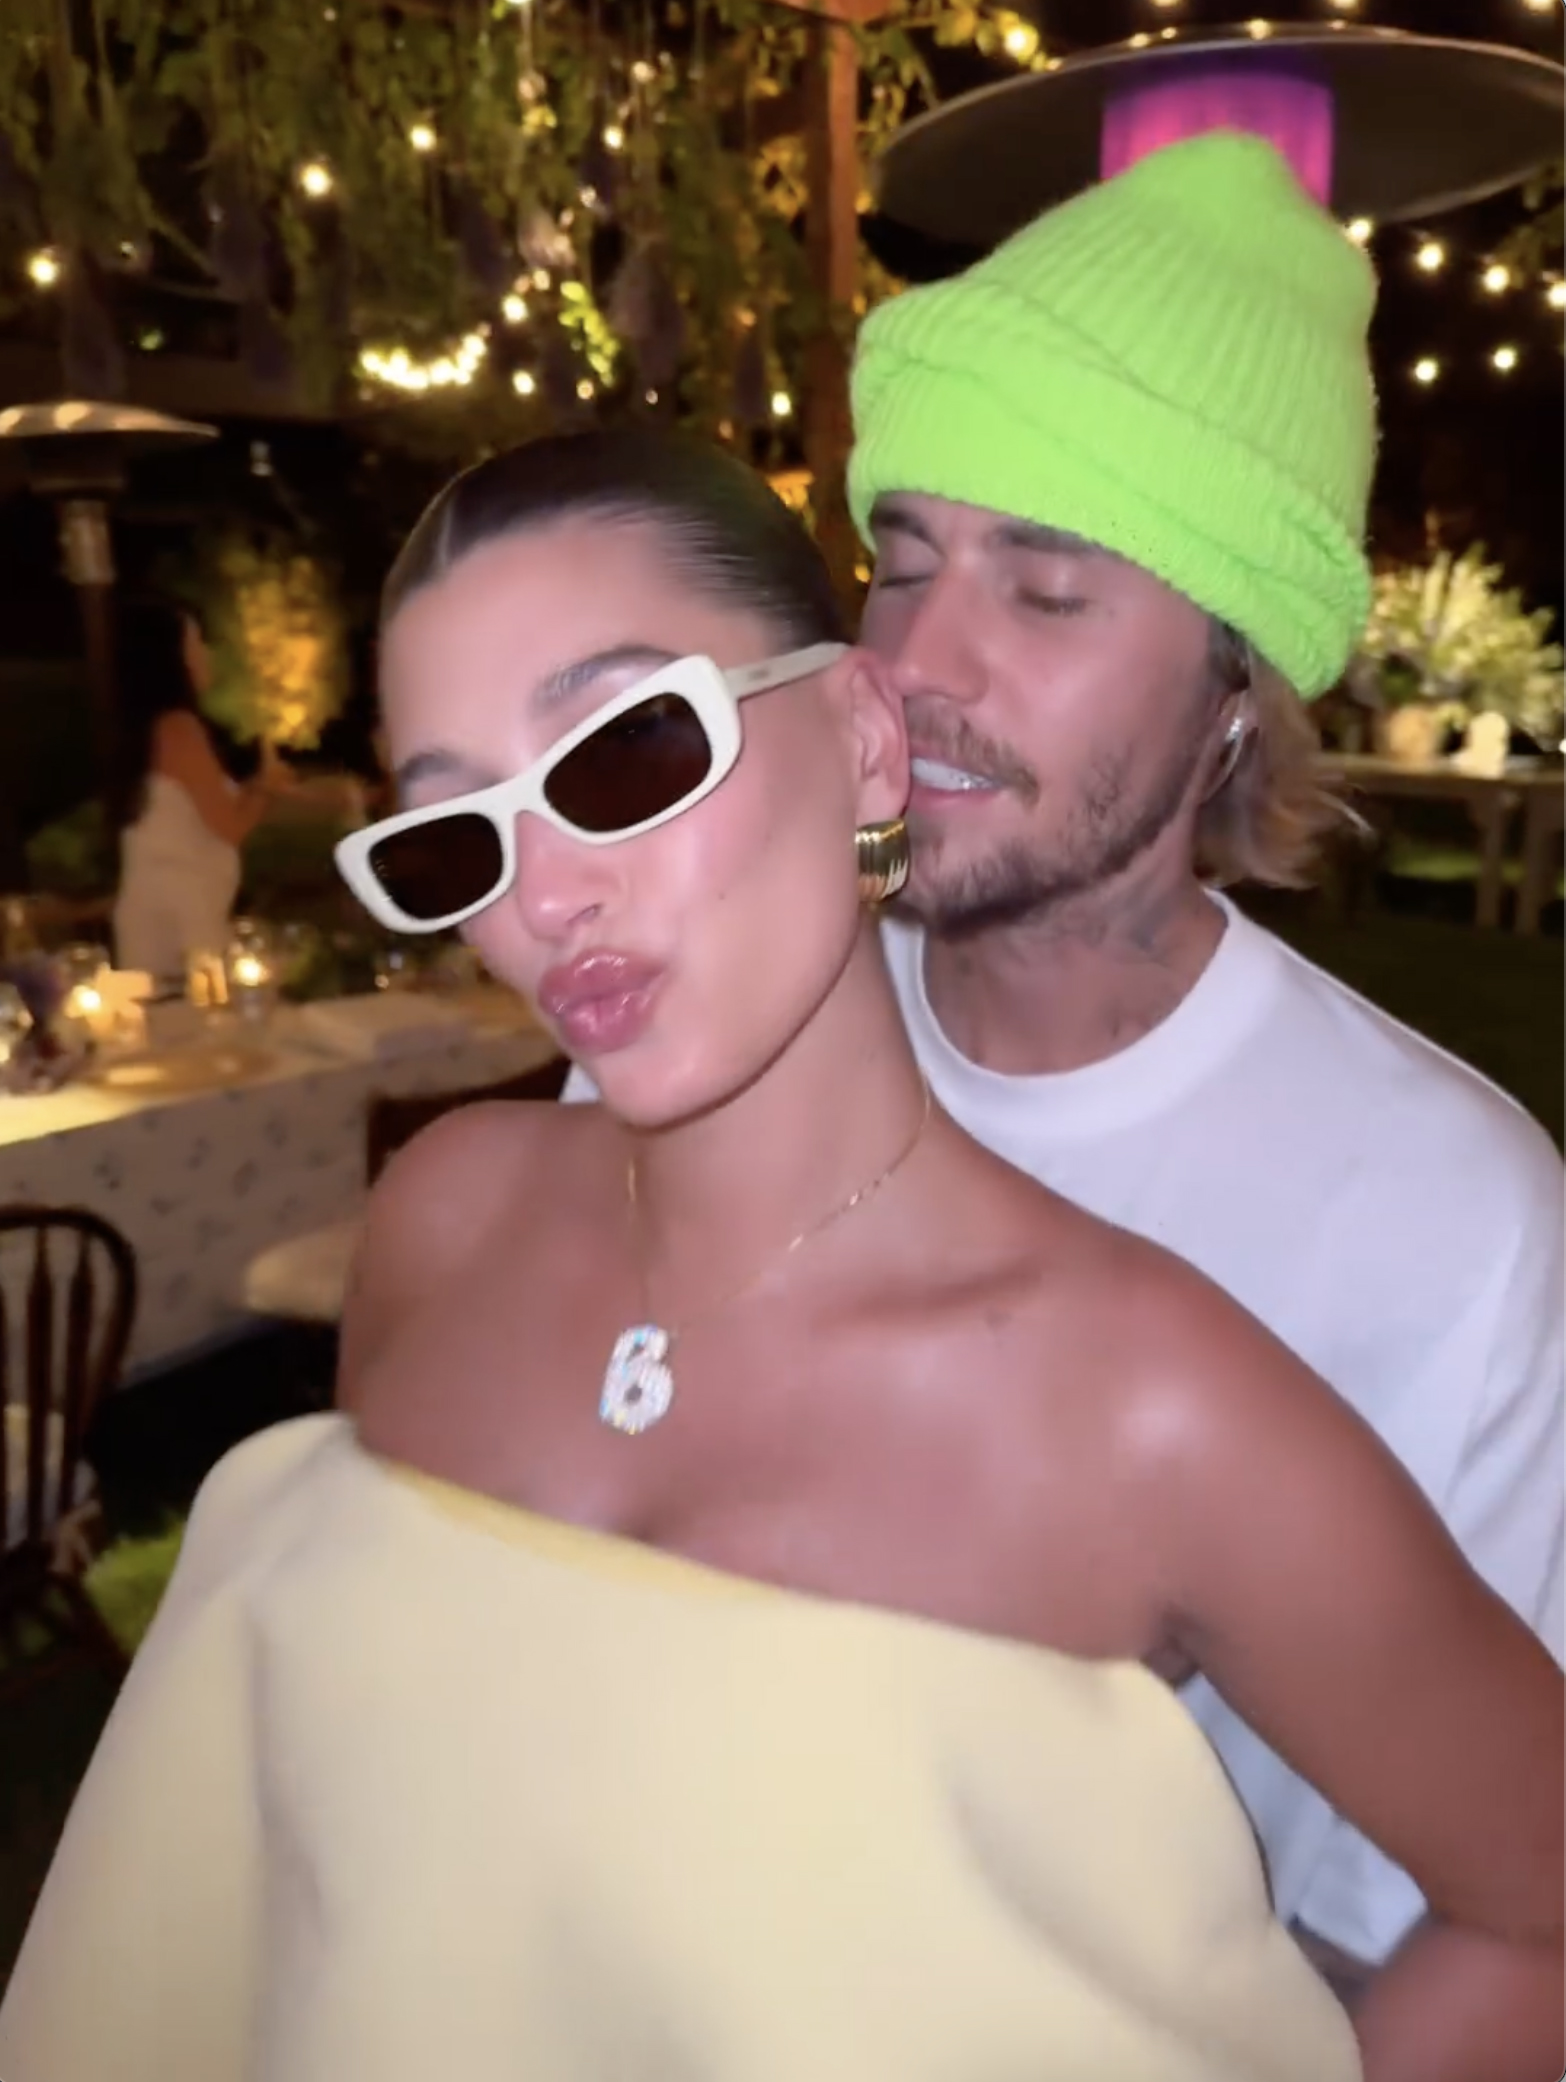 Hailey Bieber poses for the camera as her husband, Justin Bieber, embraces her